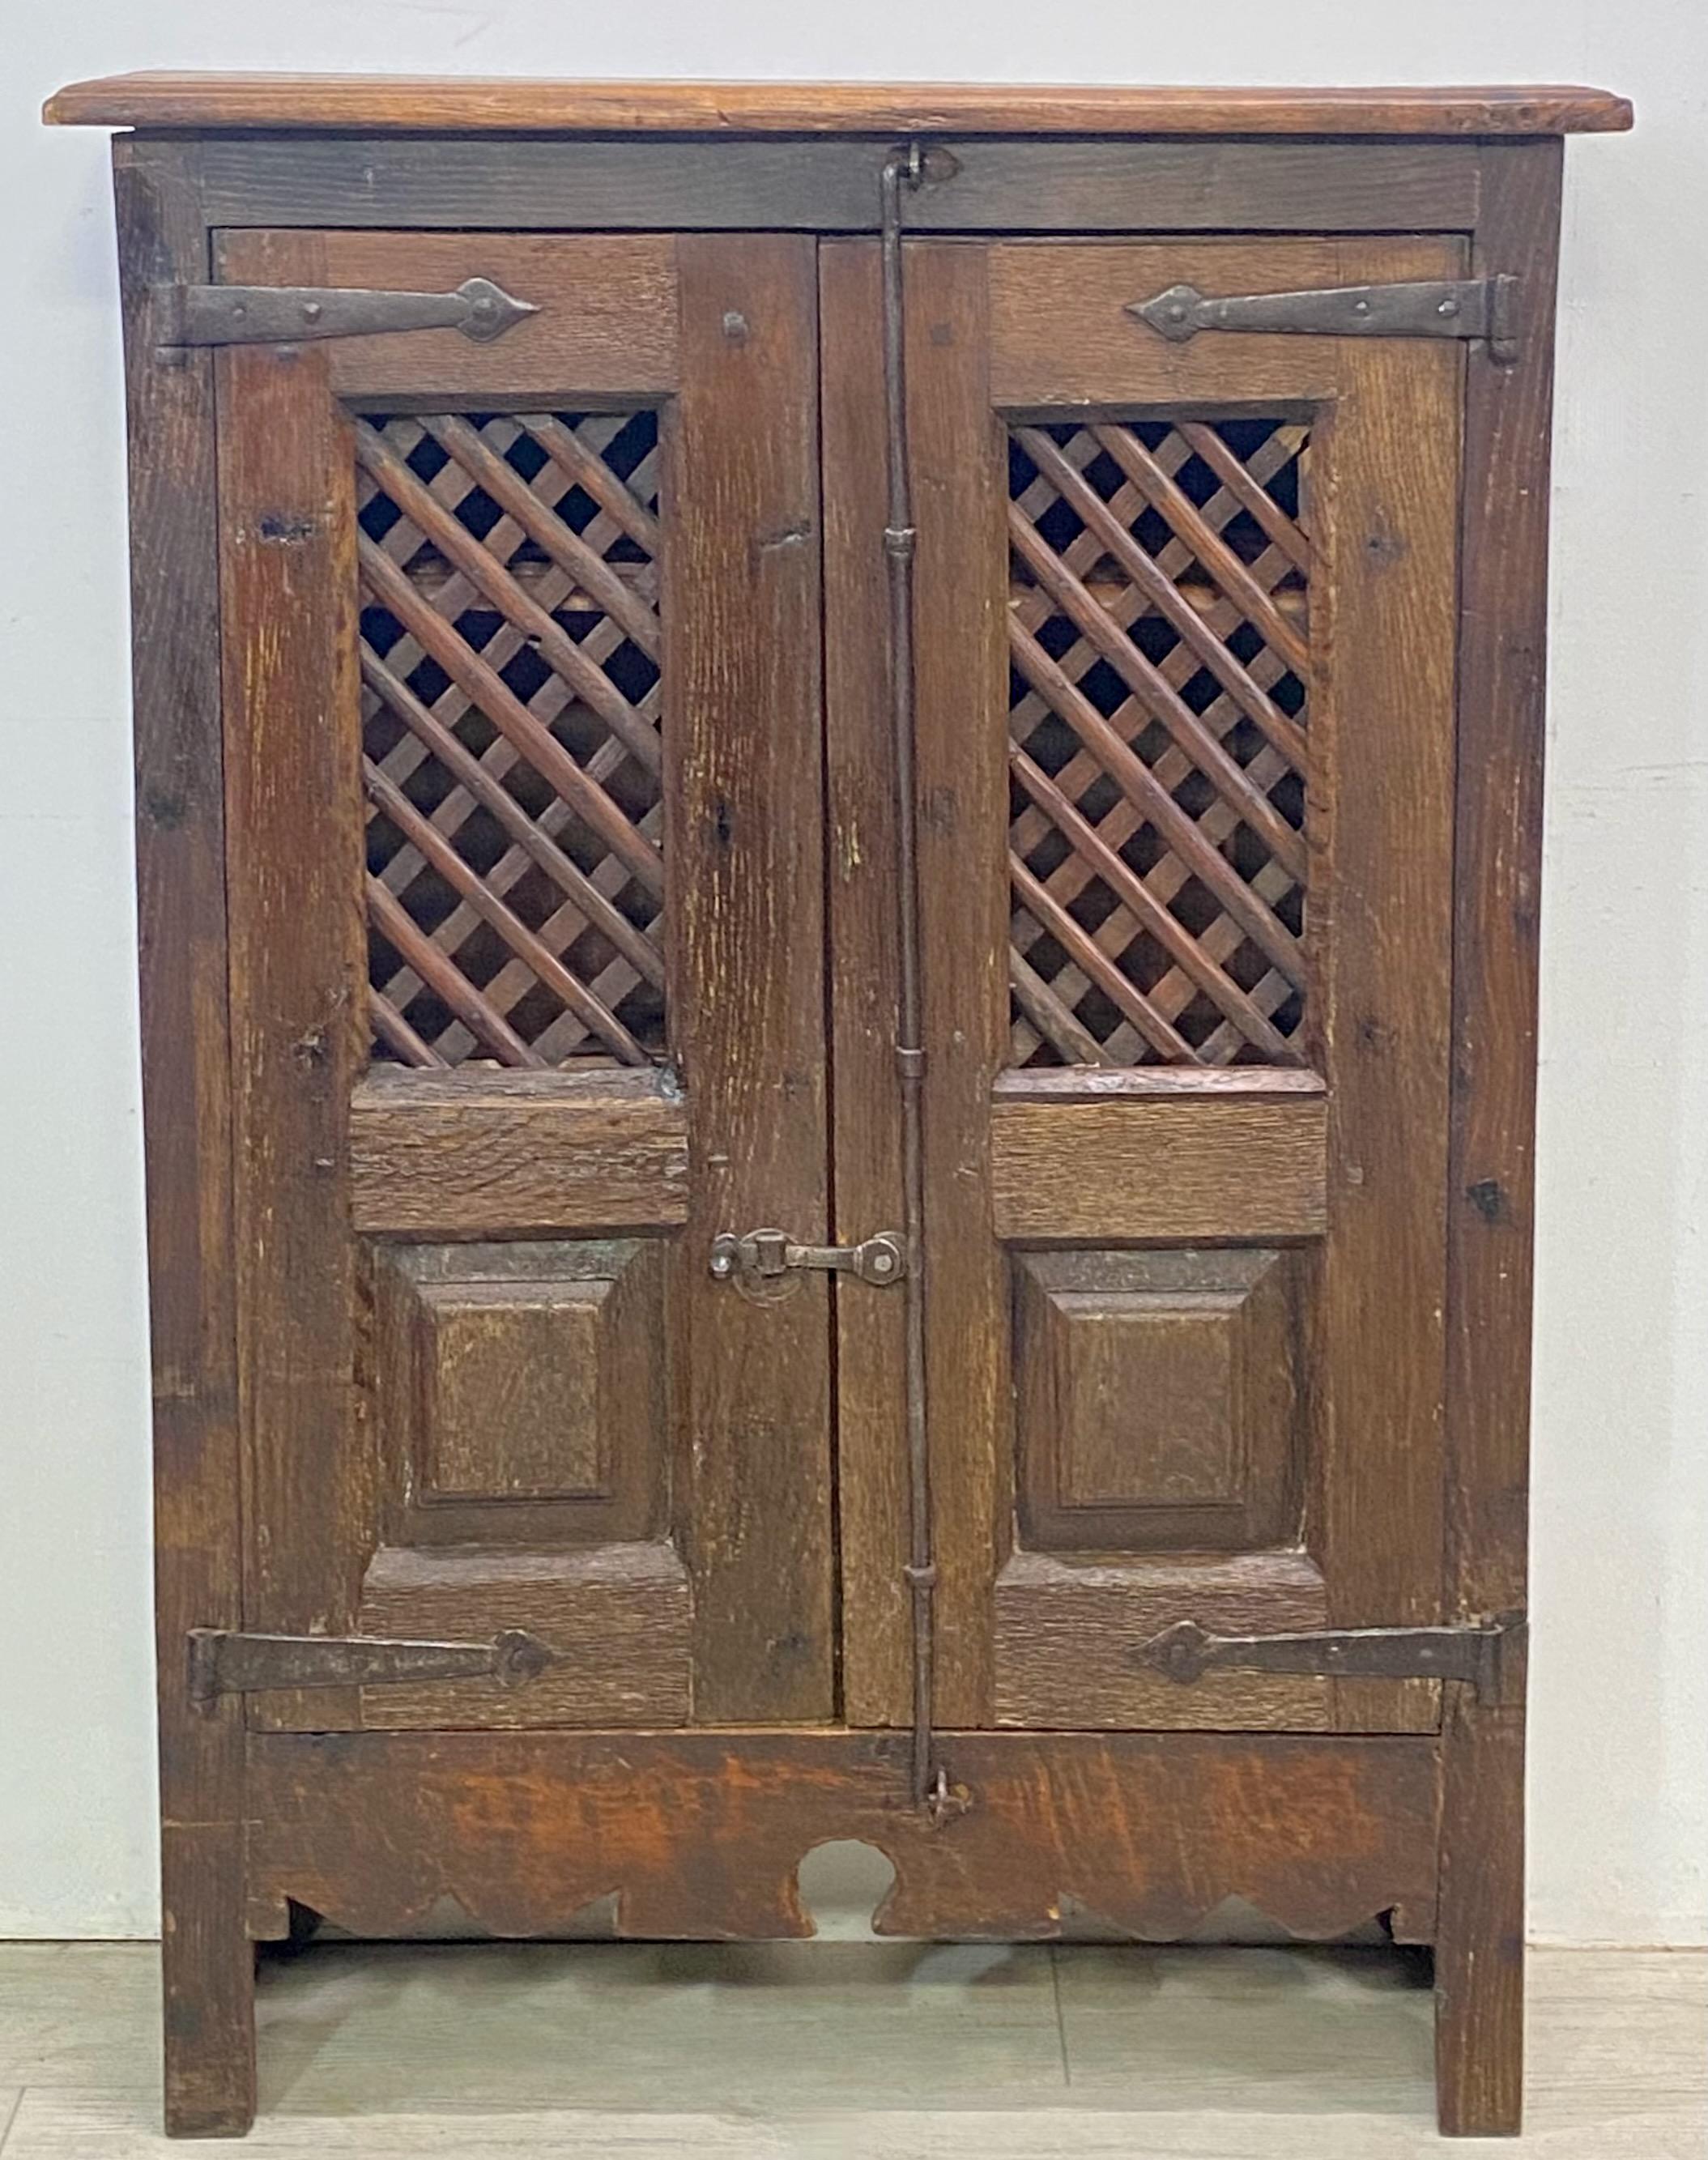 An unusually small Spanish Colonial style cabinet that most likely was used for food storage. 
Original hand forged iron hardware, and having mostly its original finish (the top looks to have been cleaned at some point in more recent time). 
18th